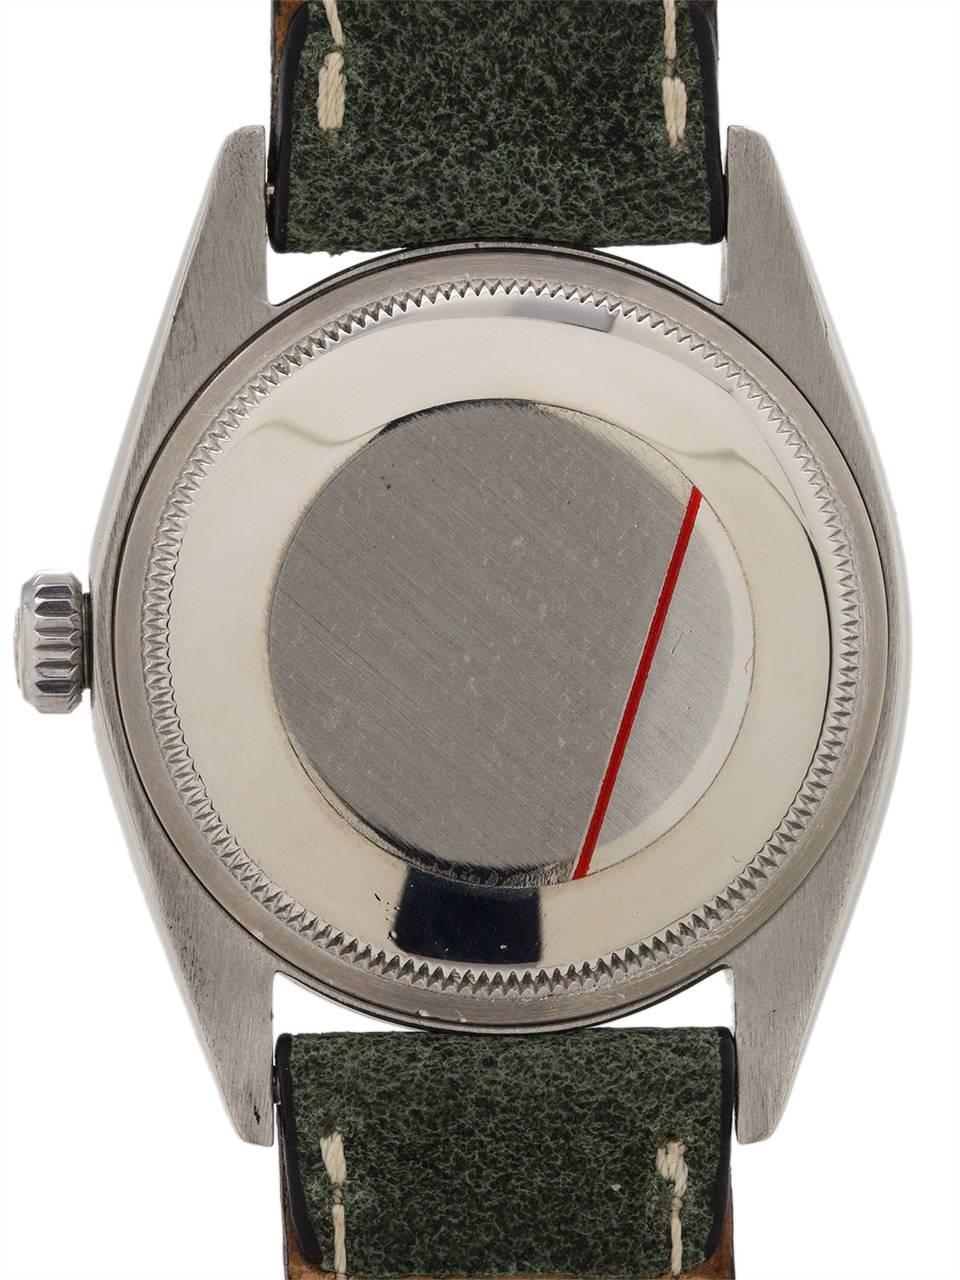 Men's Rolex Stainless Steel Oyster Perpetual Date Self Winding Wristwatch, circa 1966